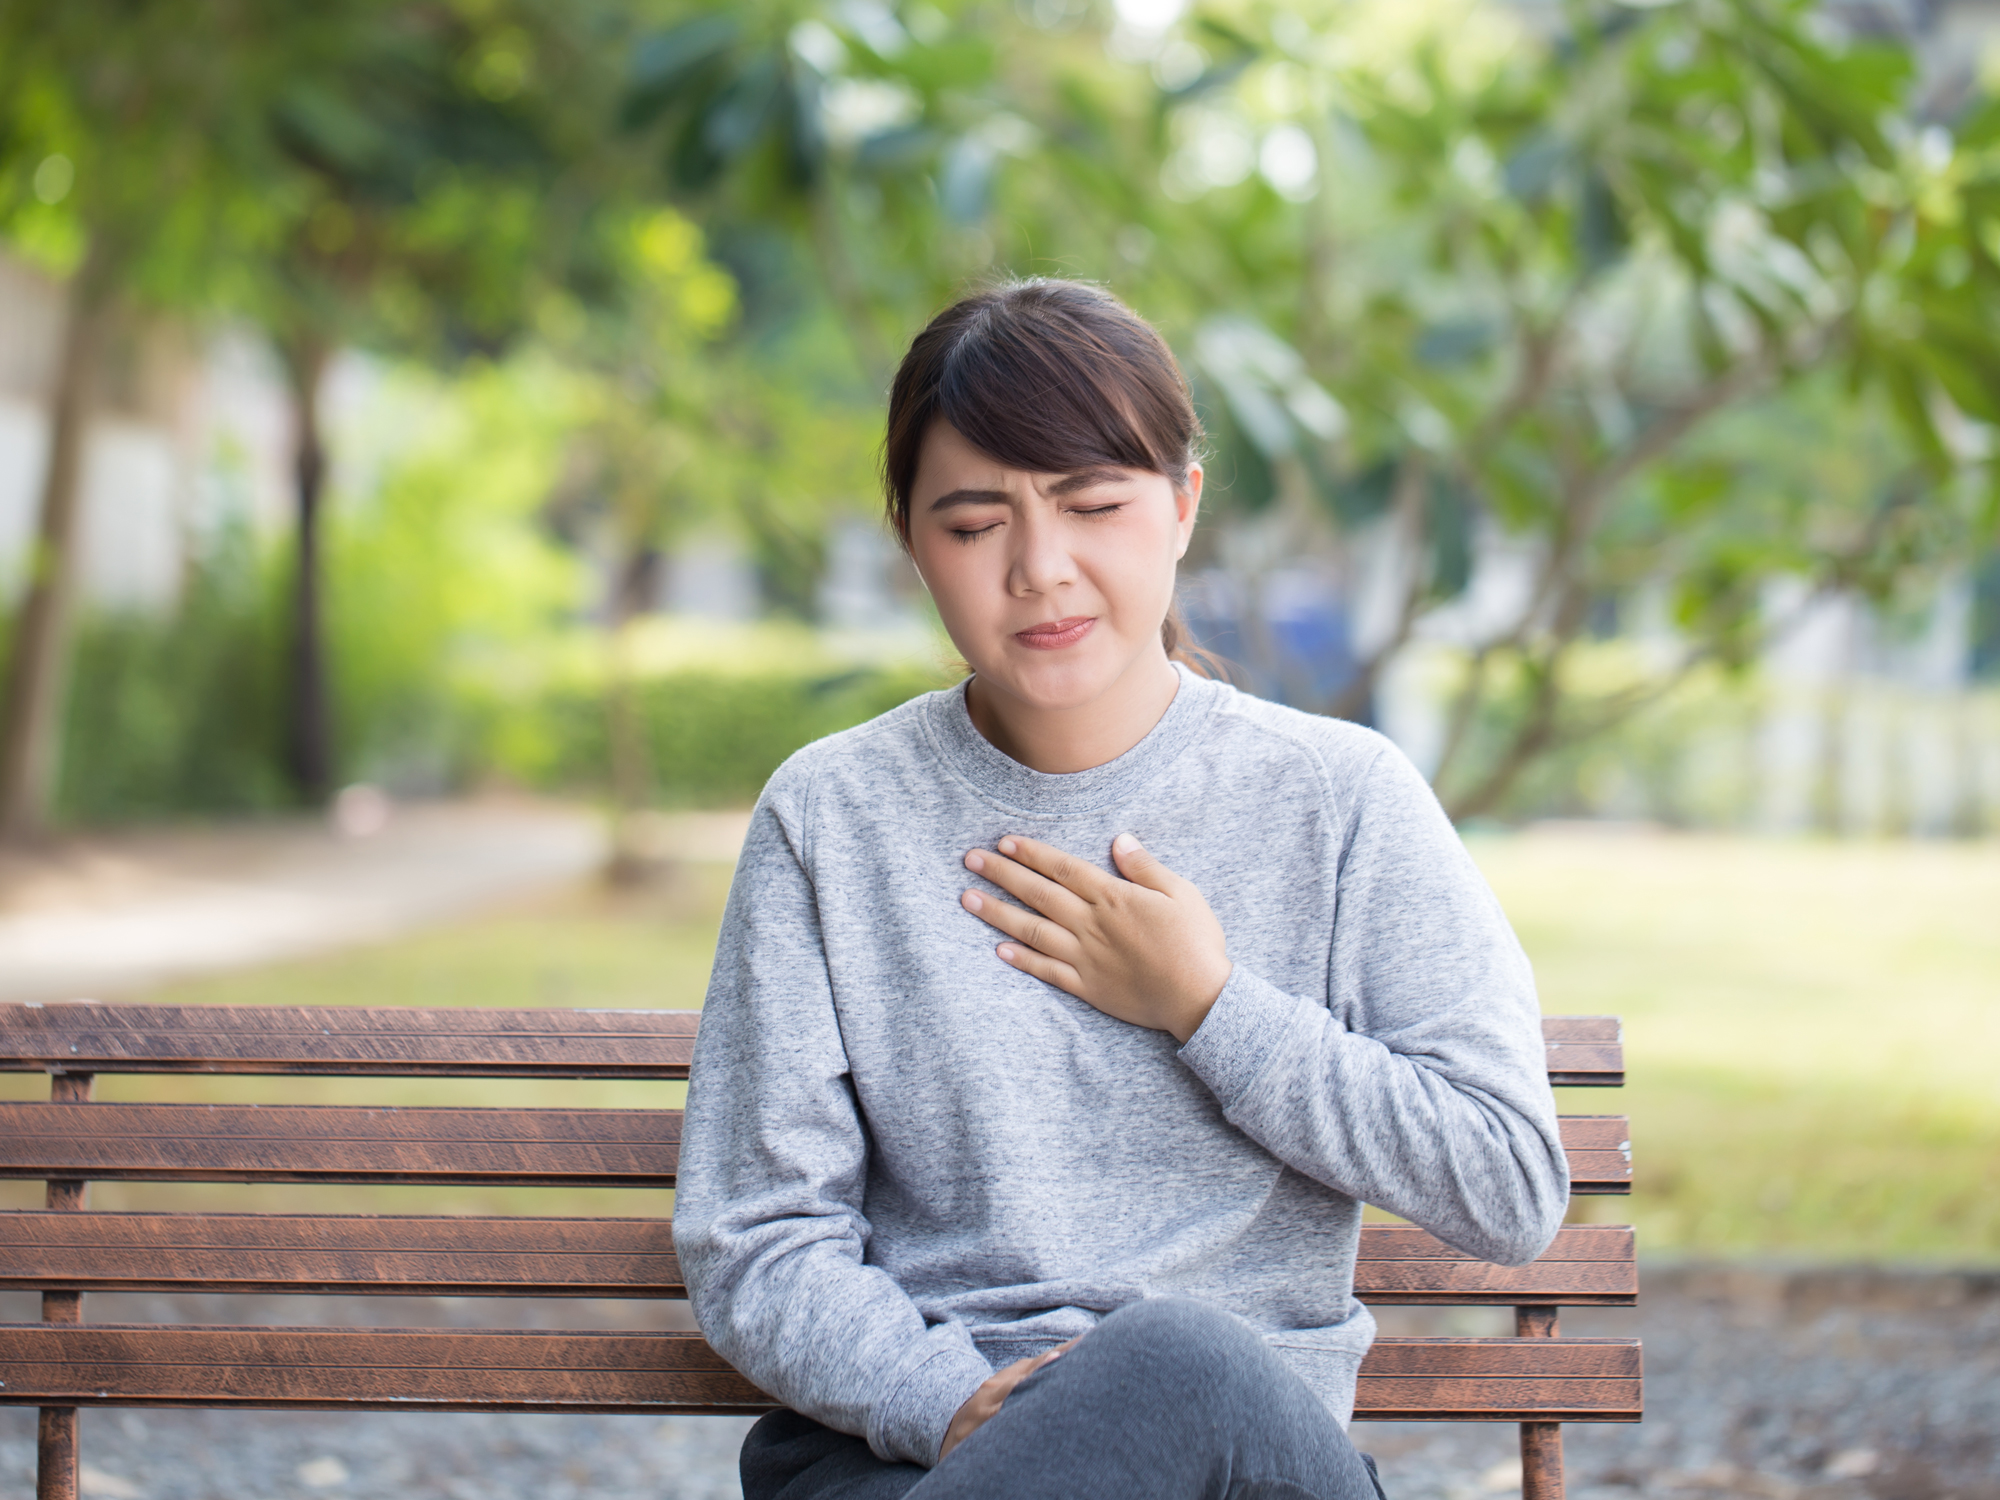 If your heartburn is worse, estrogen could be to blame